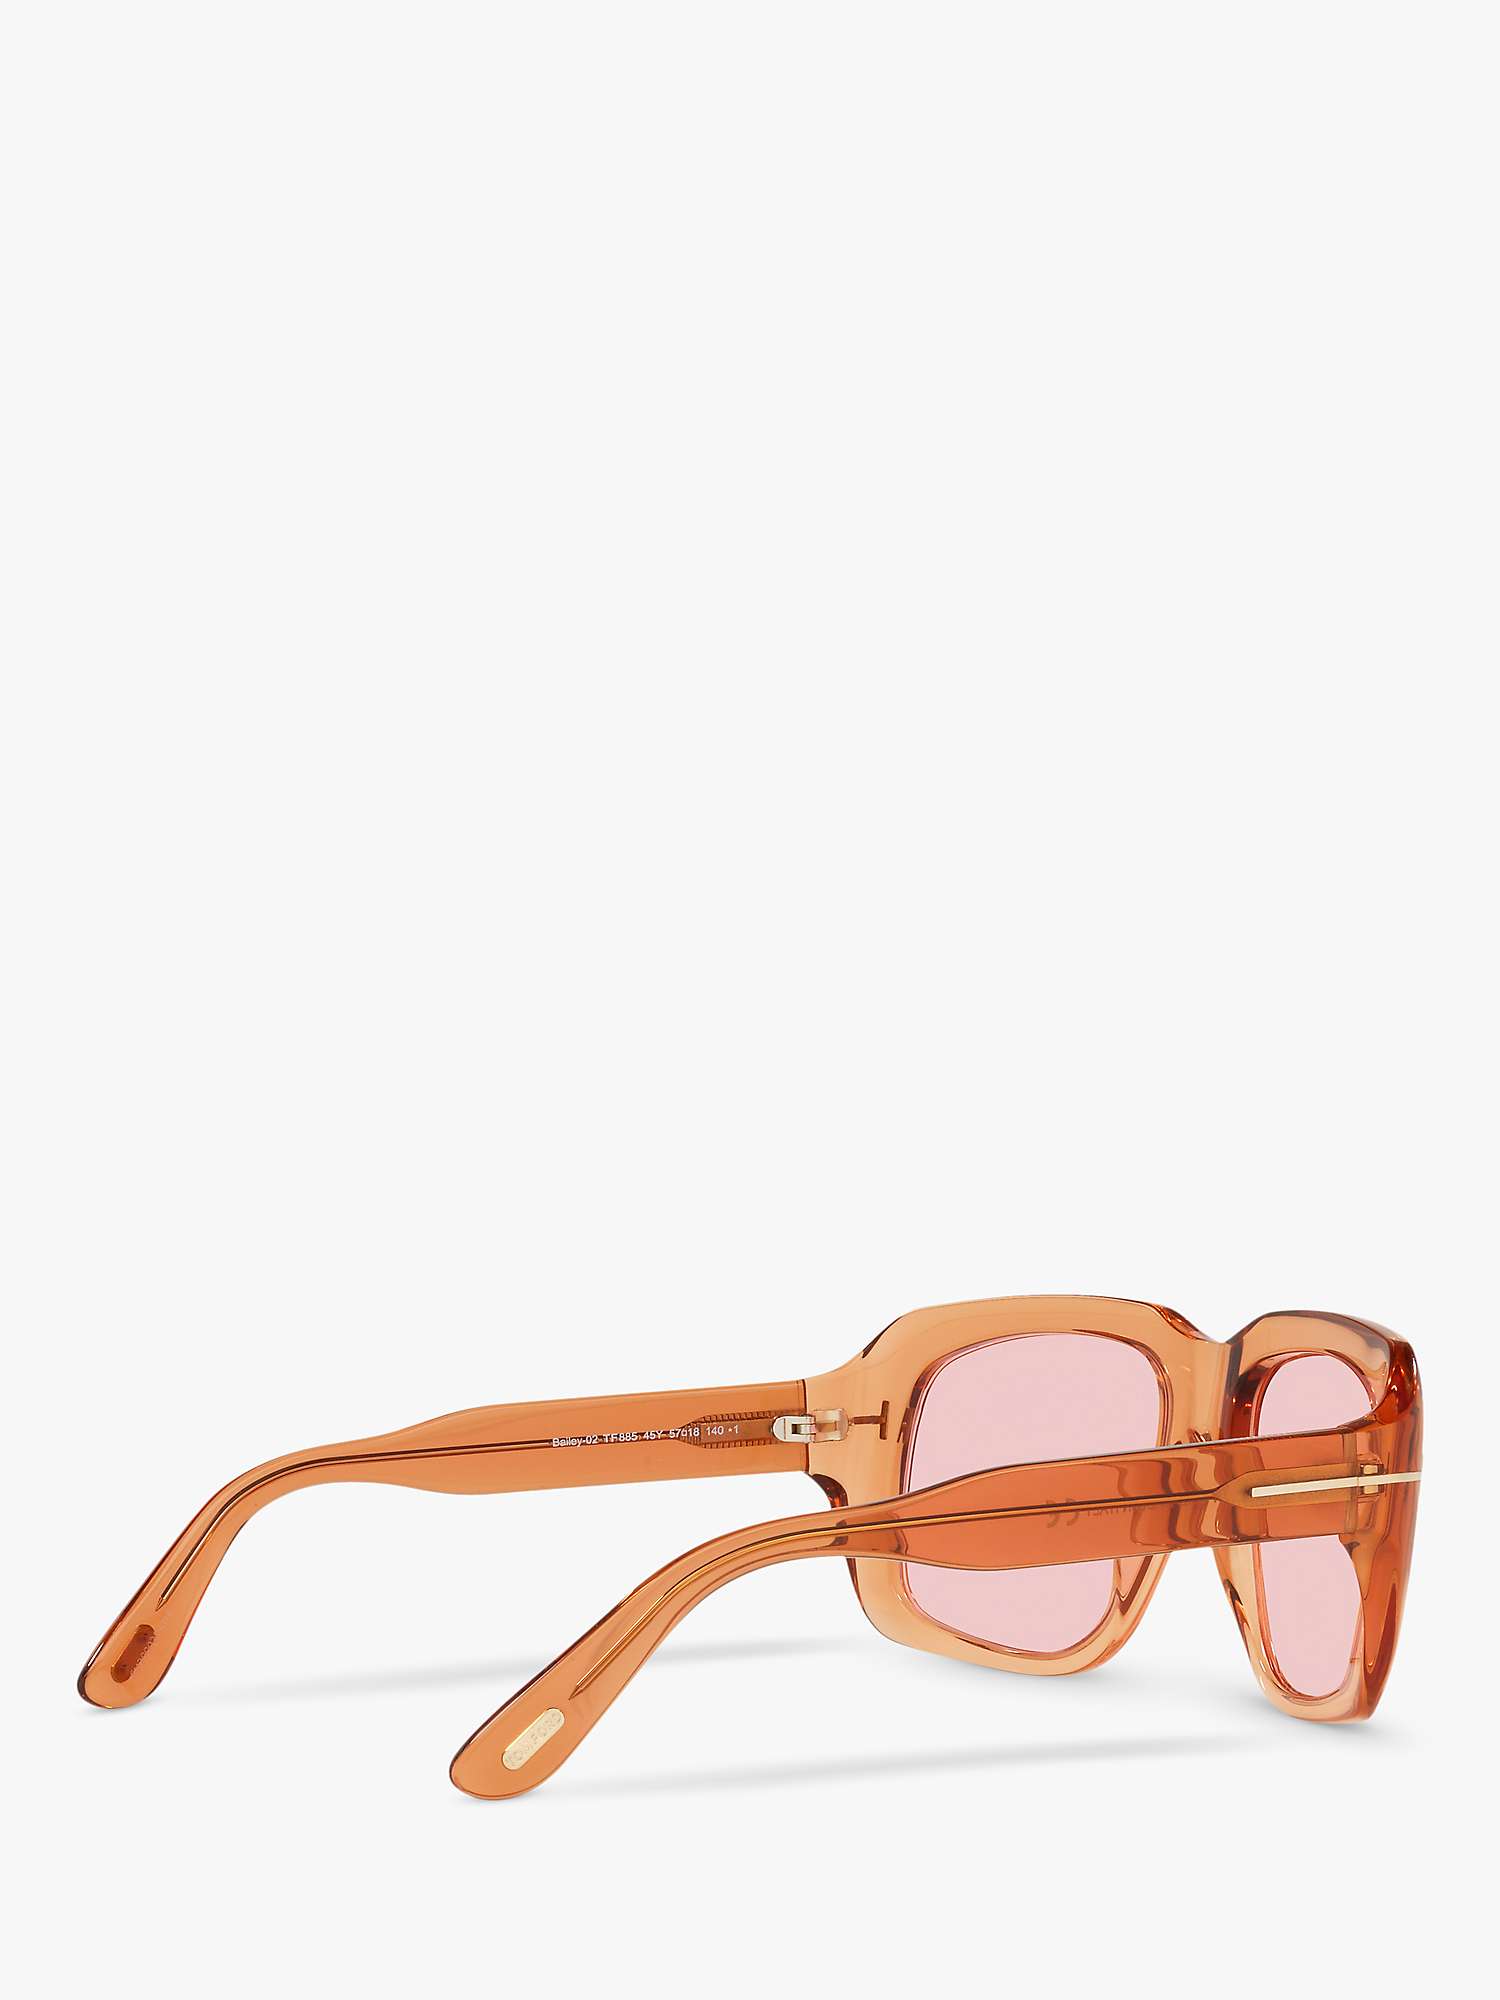 Buy TOM FORD FT0885 Men's Bailey Square Sunglasses, Shiny Brown Online at johnlewis.com